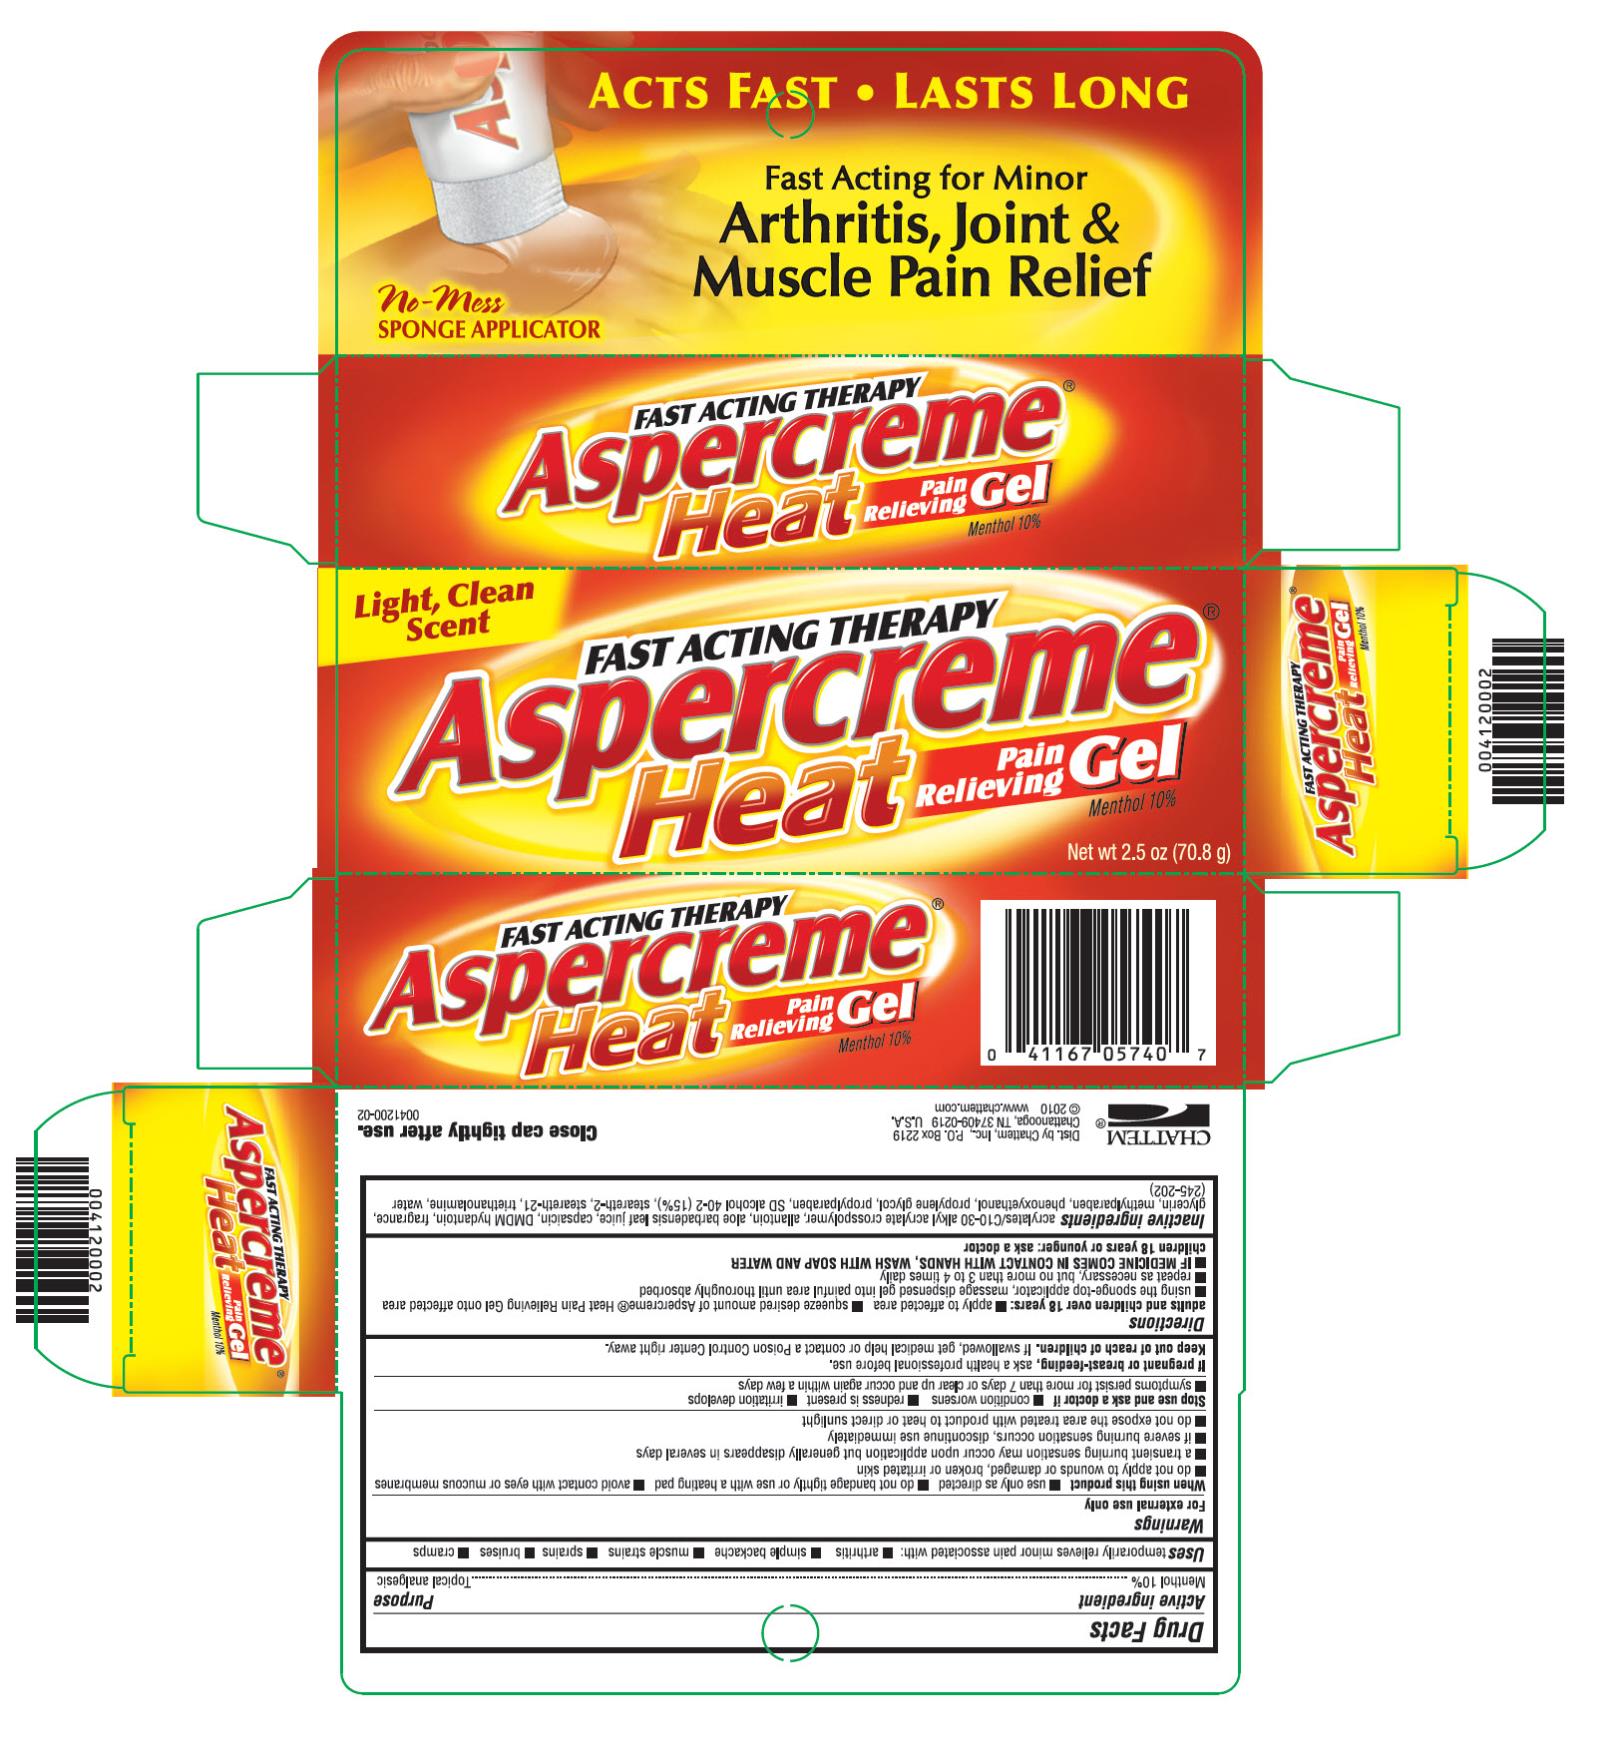 Acts Fast  Lasts Long Fast Acting for Minor Arthritis, Joint &amp; Muscle Pain Relief Fast Acting Therapy Aspercreme Heat Pain Relieving Gel Menthol 10% Net wt 2.5 oz (70.8 g)